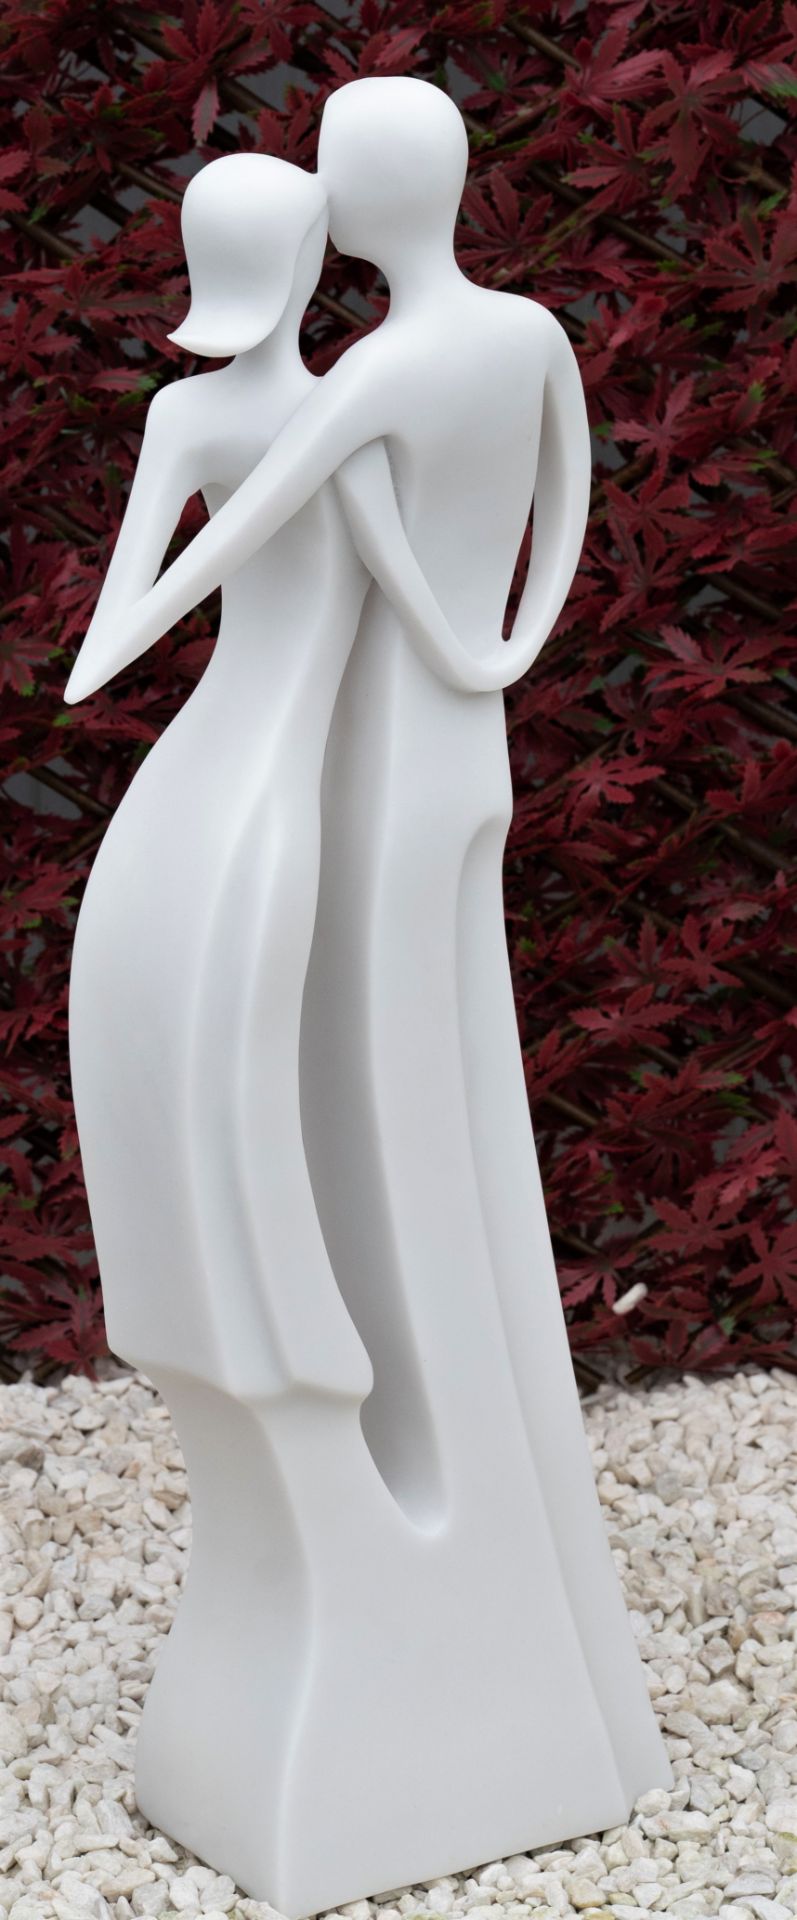 GORGEOUS TERRAZO MARBLE "FIRST DATE" GARDEN STATUE - Image 6 of 6